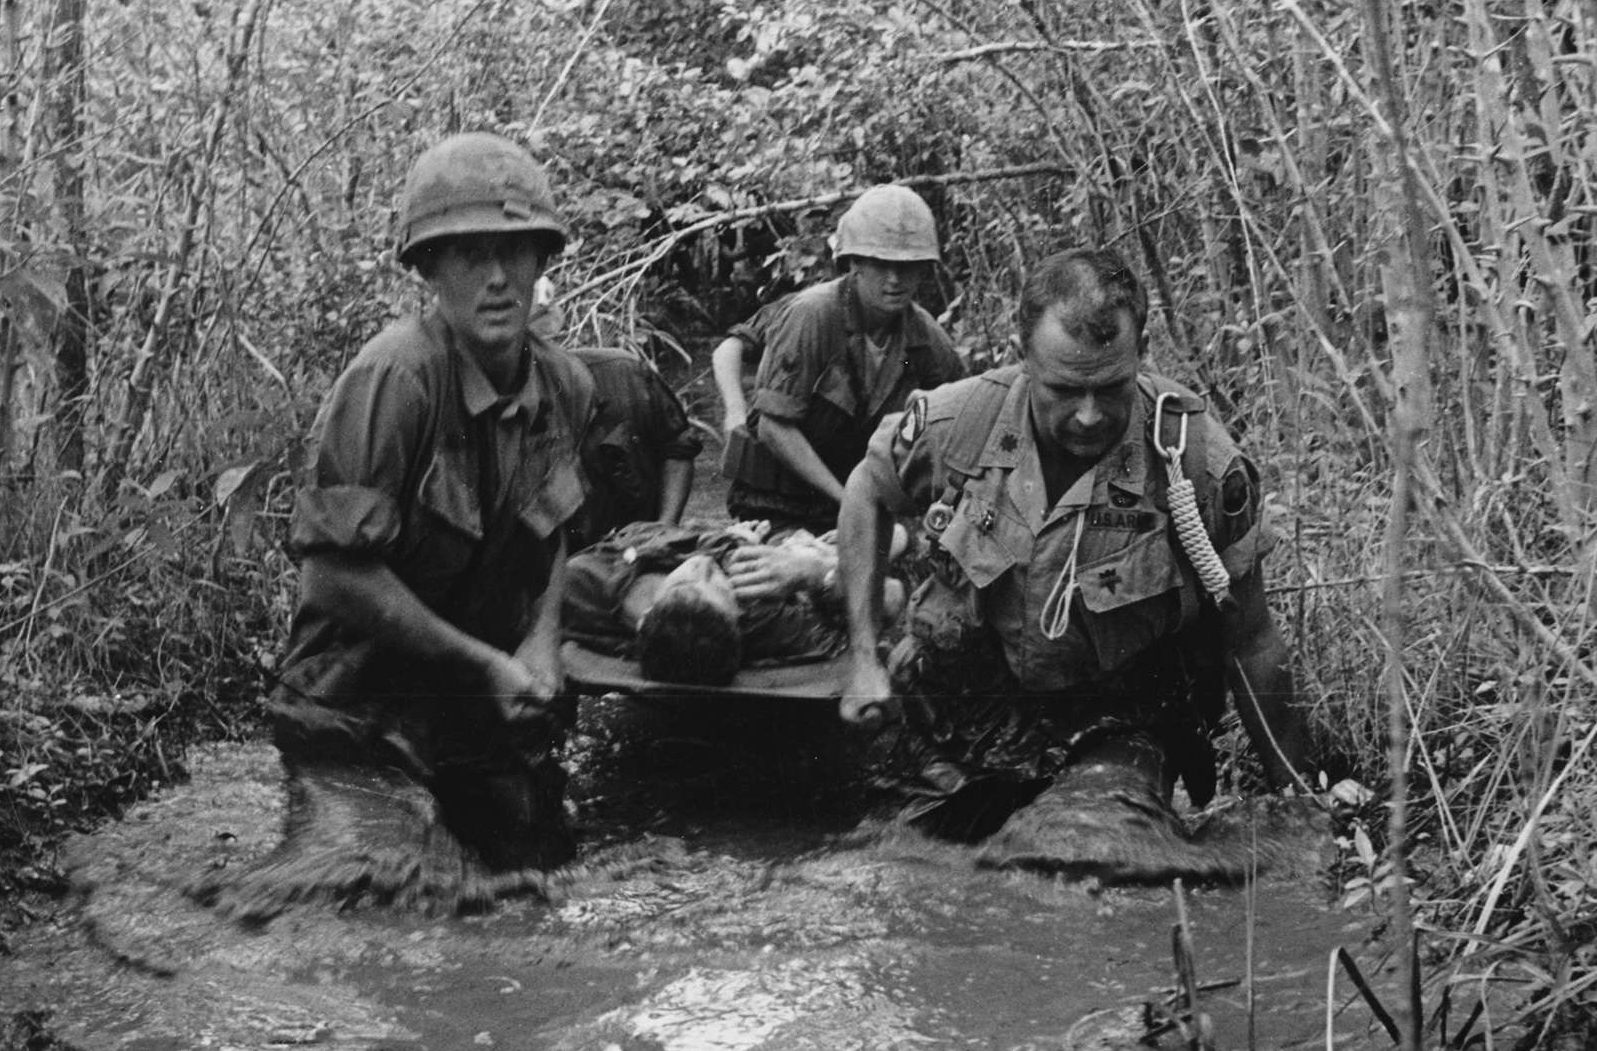 Soldiers Carry a Wounded Comrade Through a Swamp